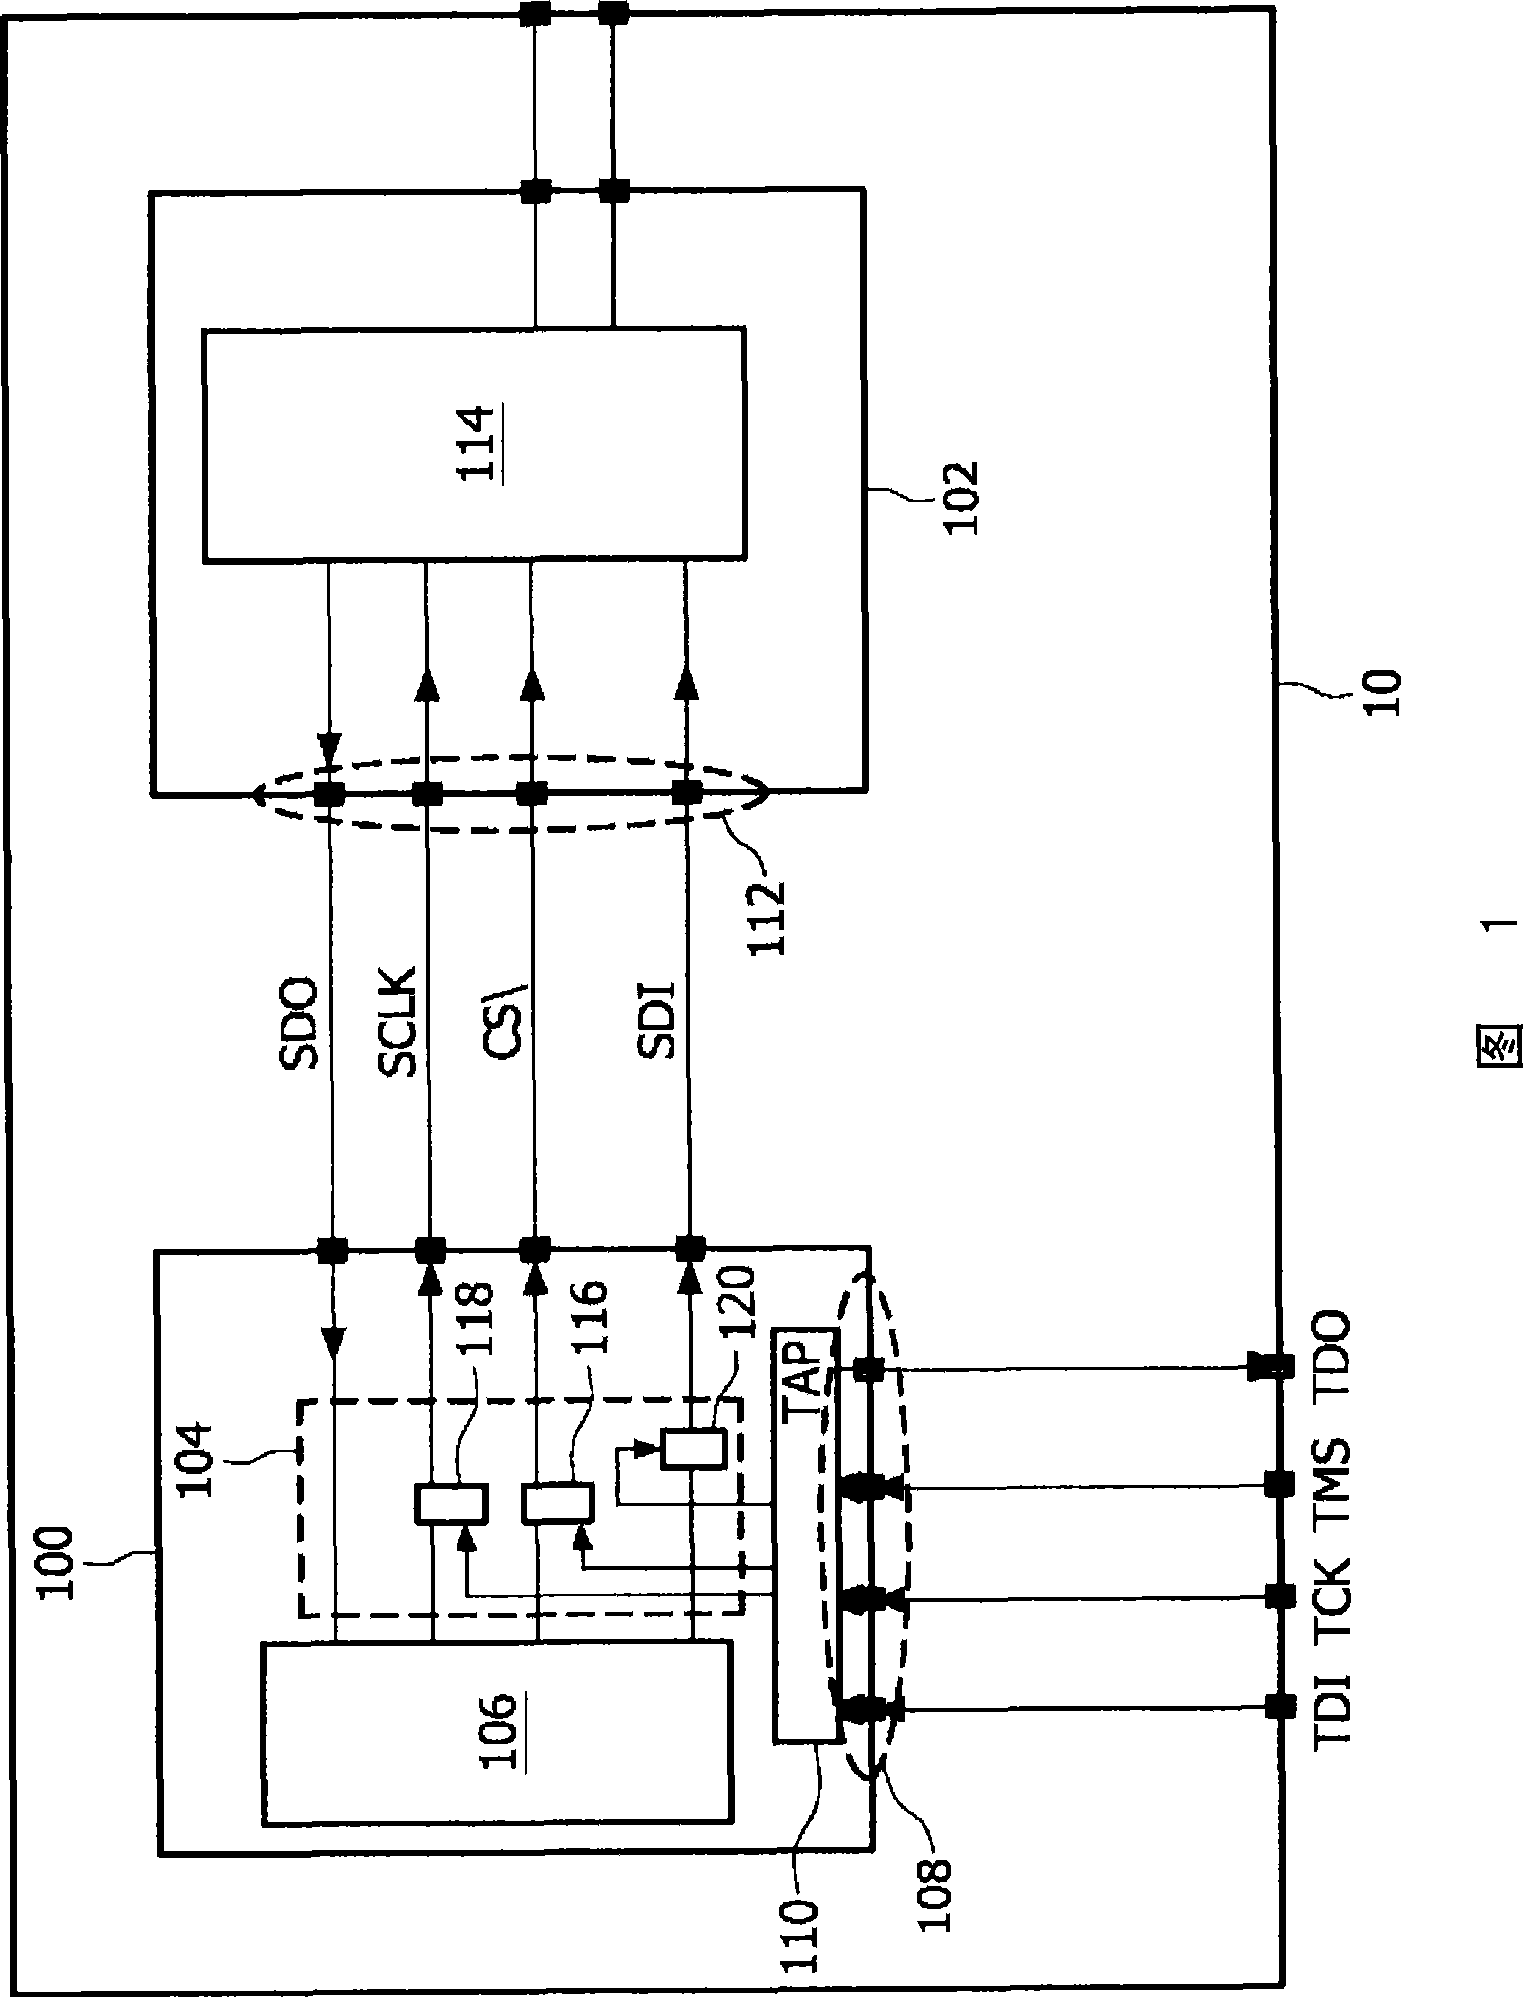 IC circuit with test access control circuit using a JTAG interface